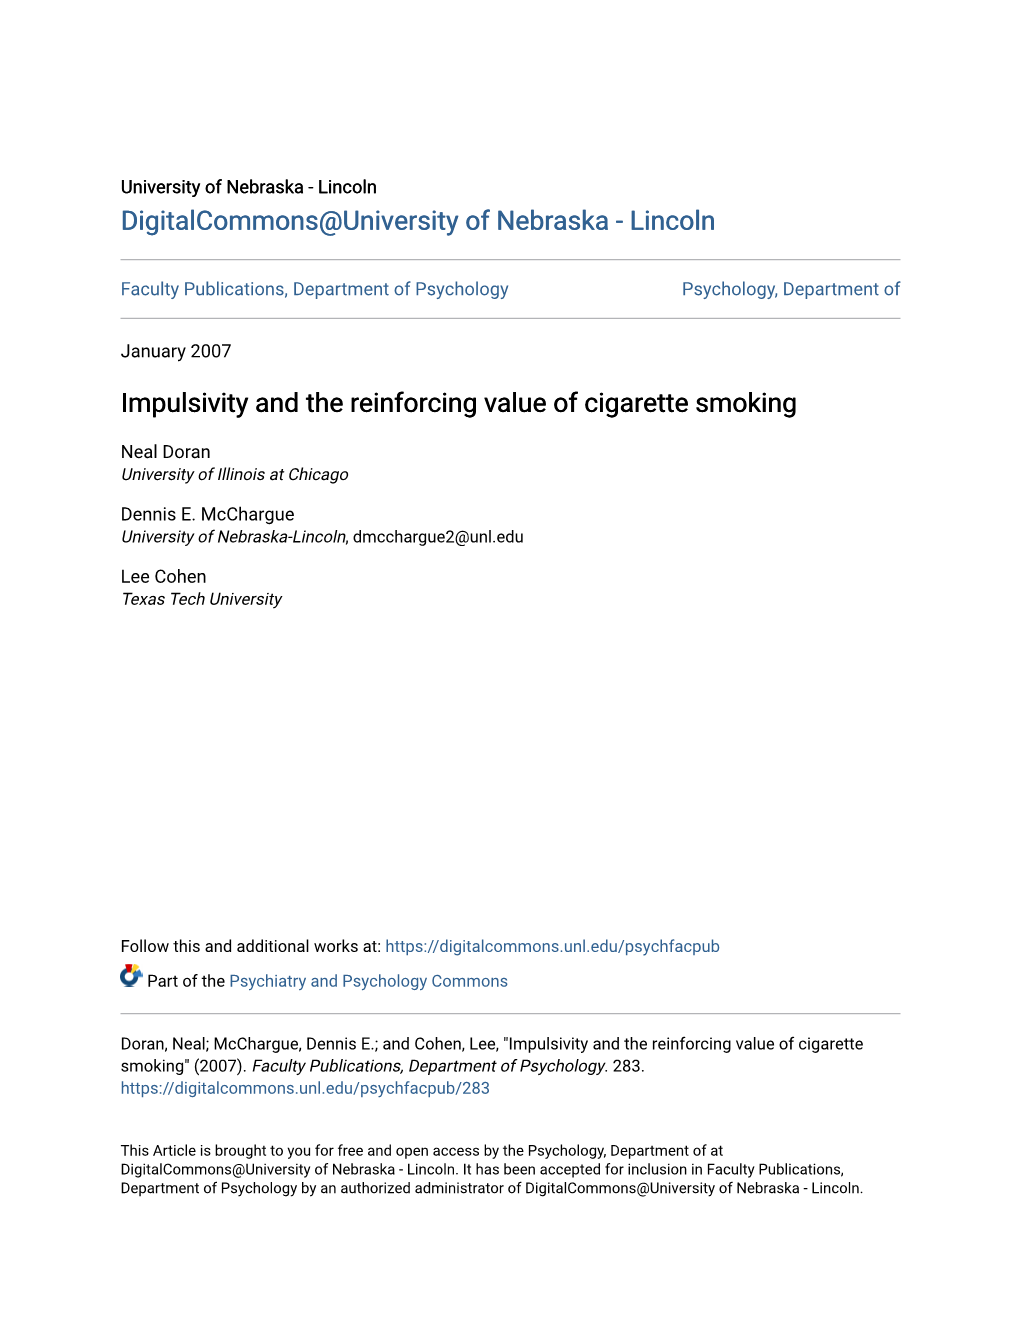 Impulsivity and the Reinforcing Value of Cigarette Smoking